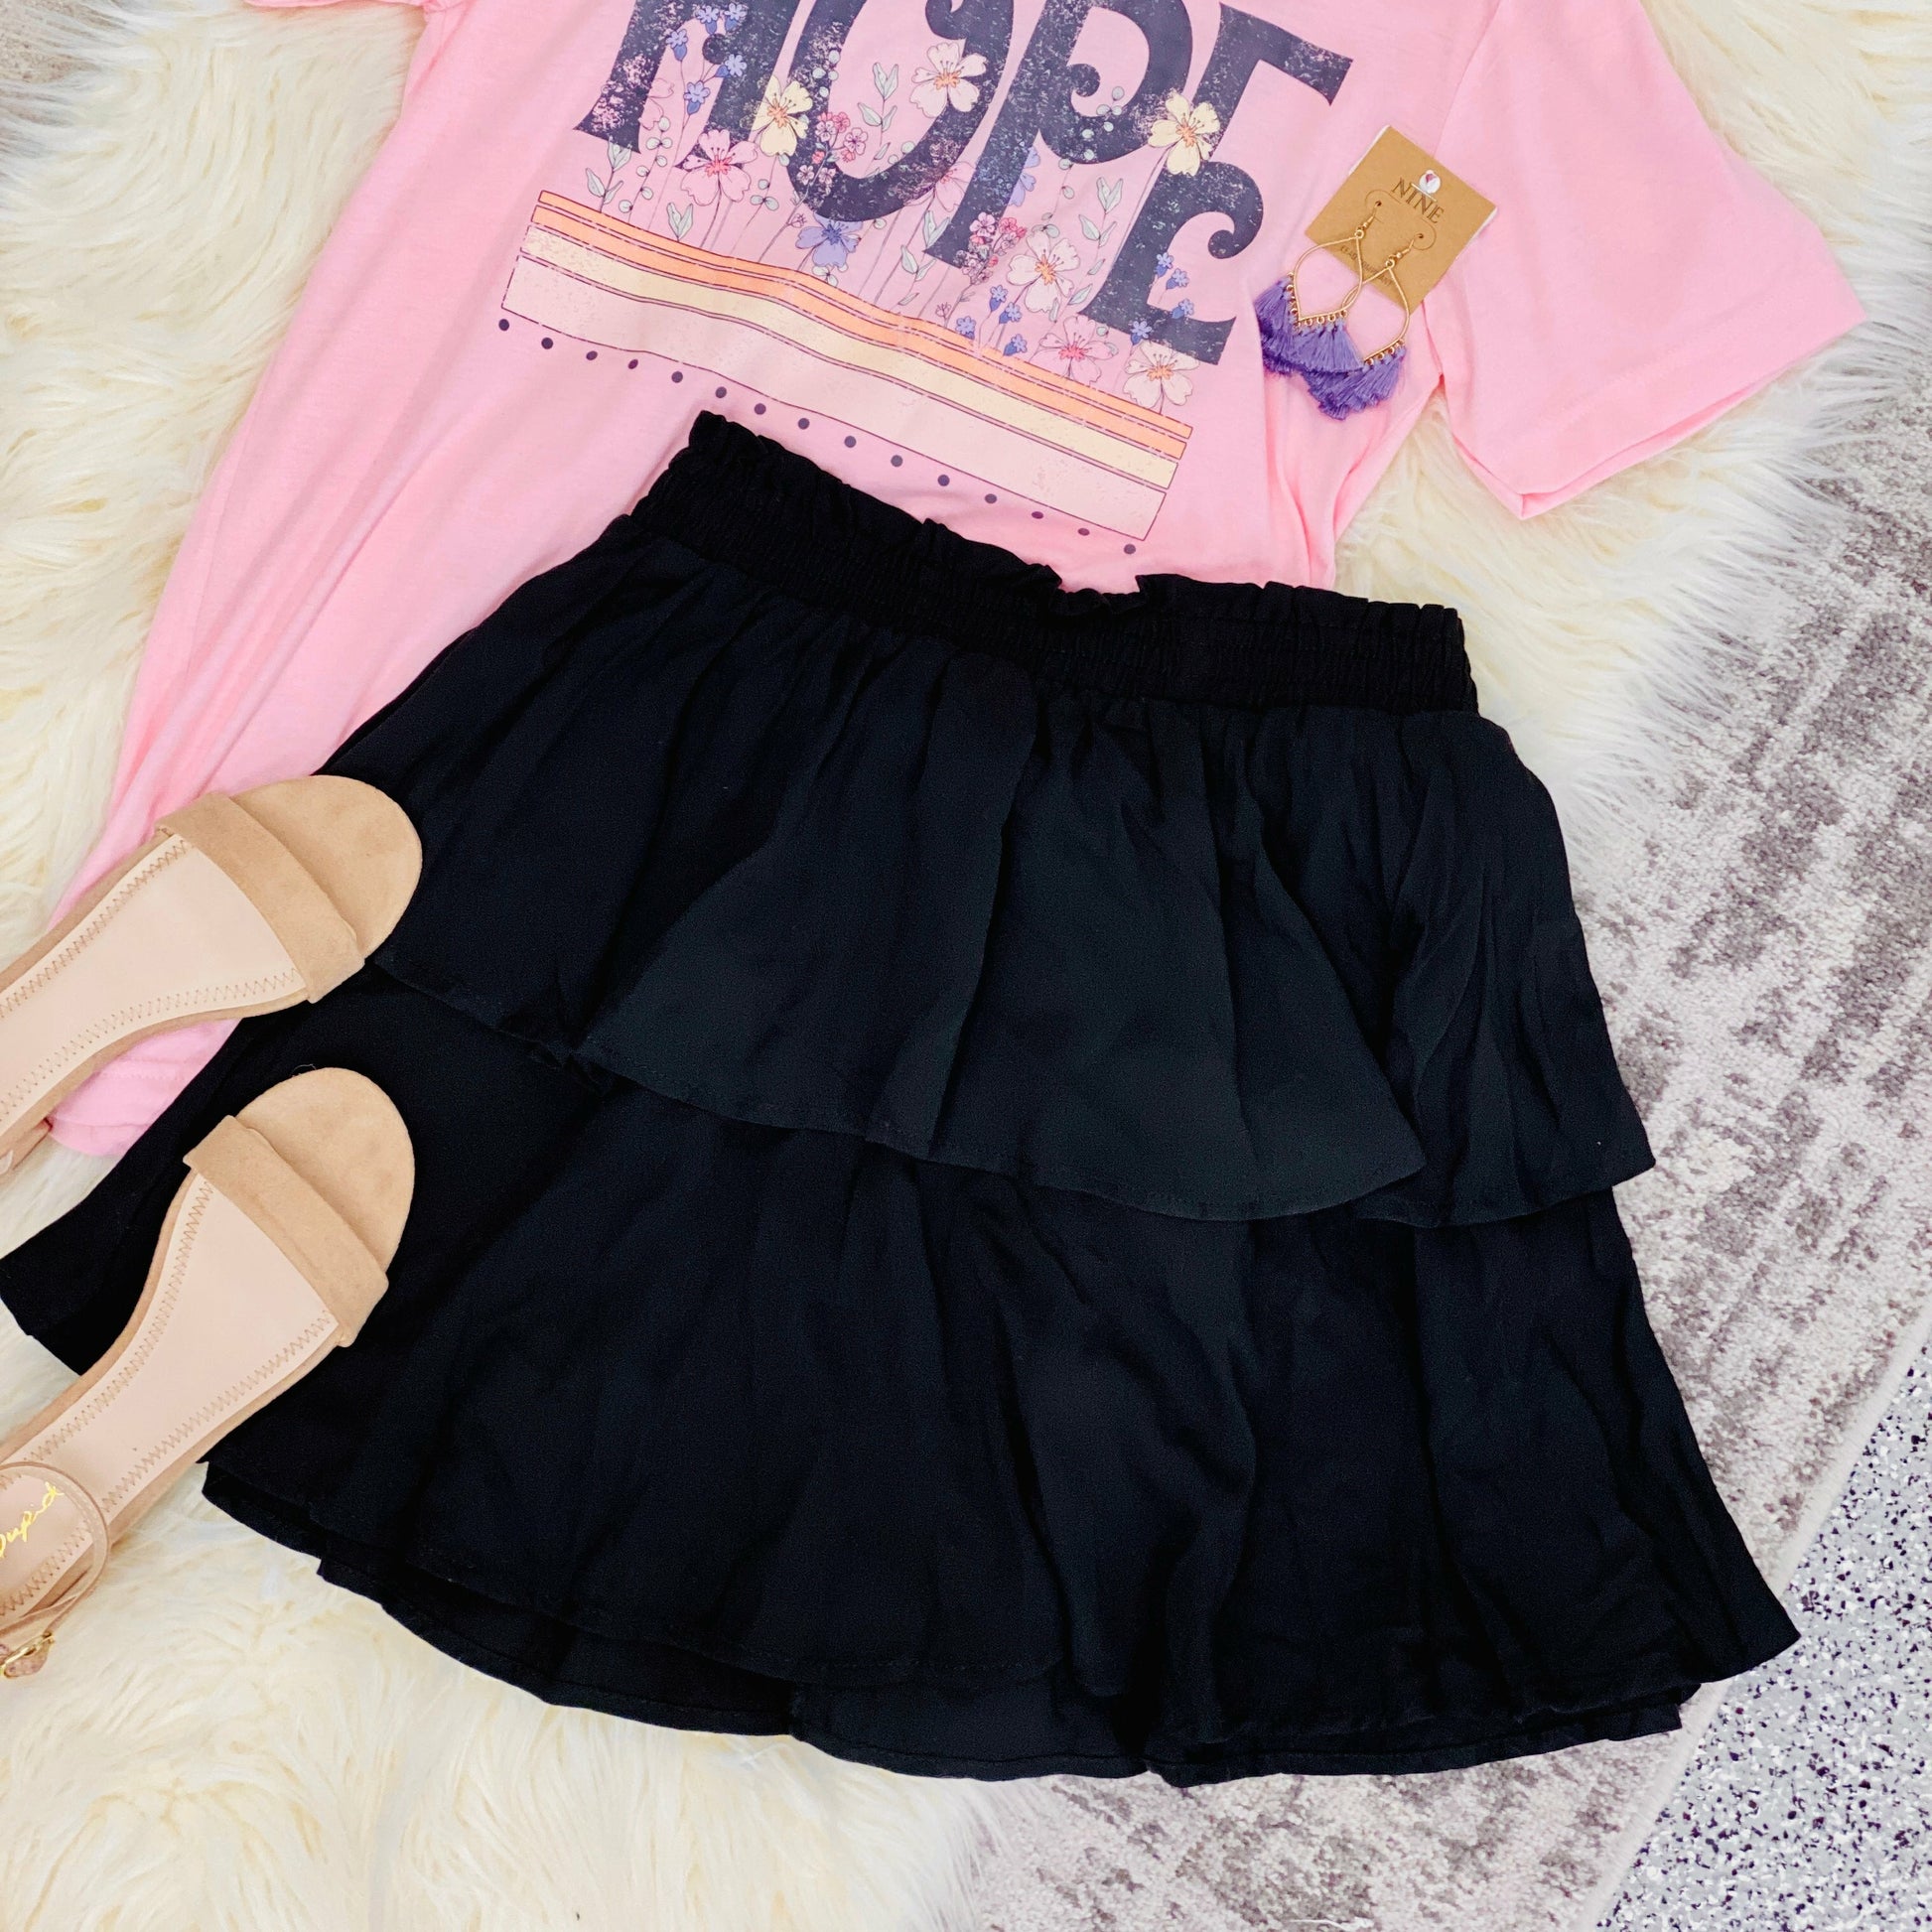 The possibilities for this black skirt is limitless! Dress it up or down for any occasion.